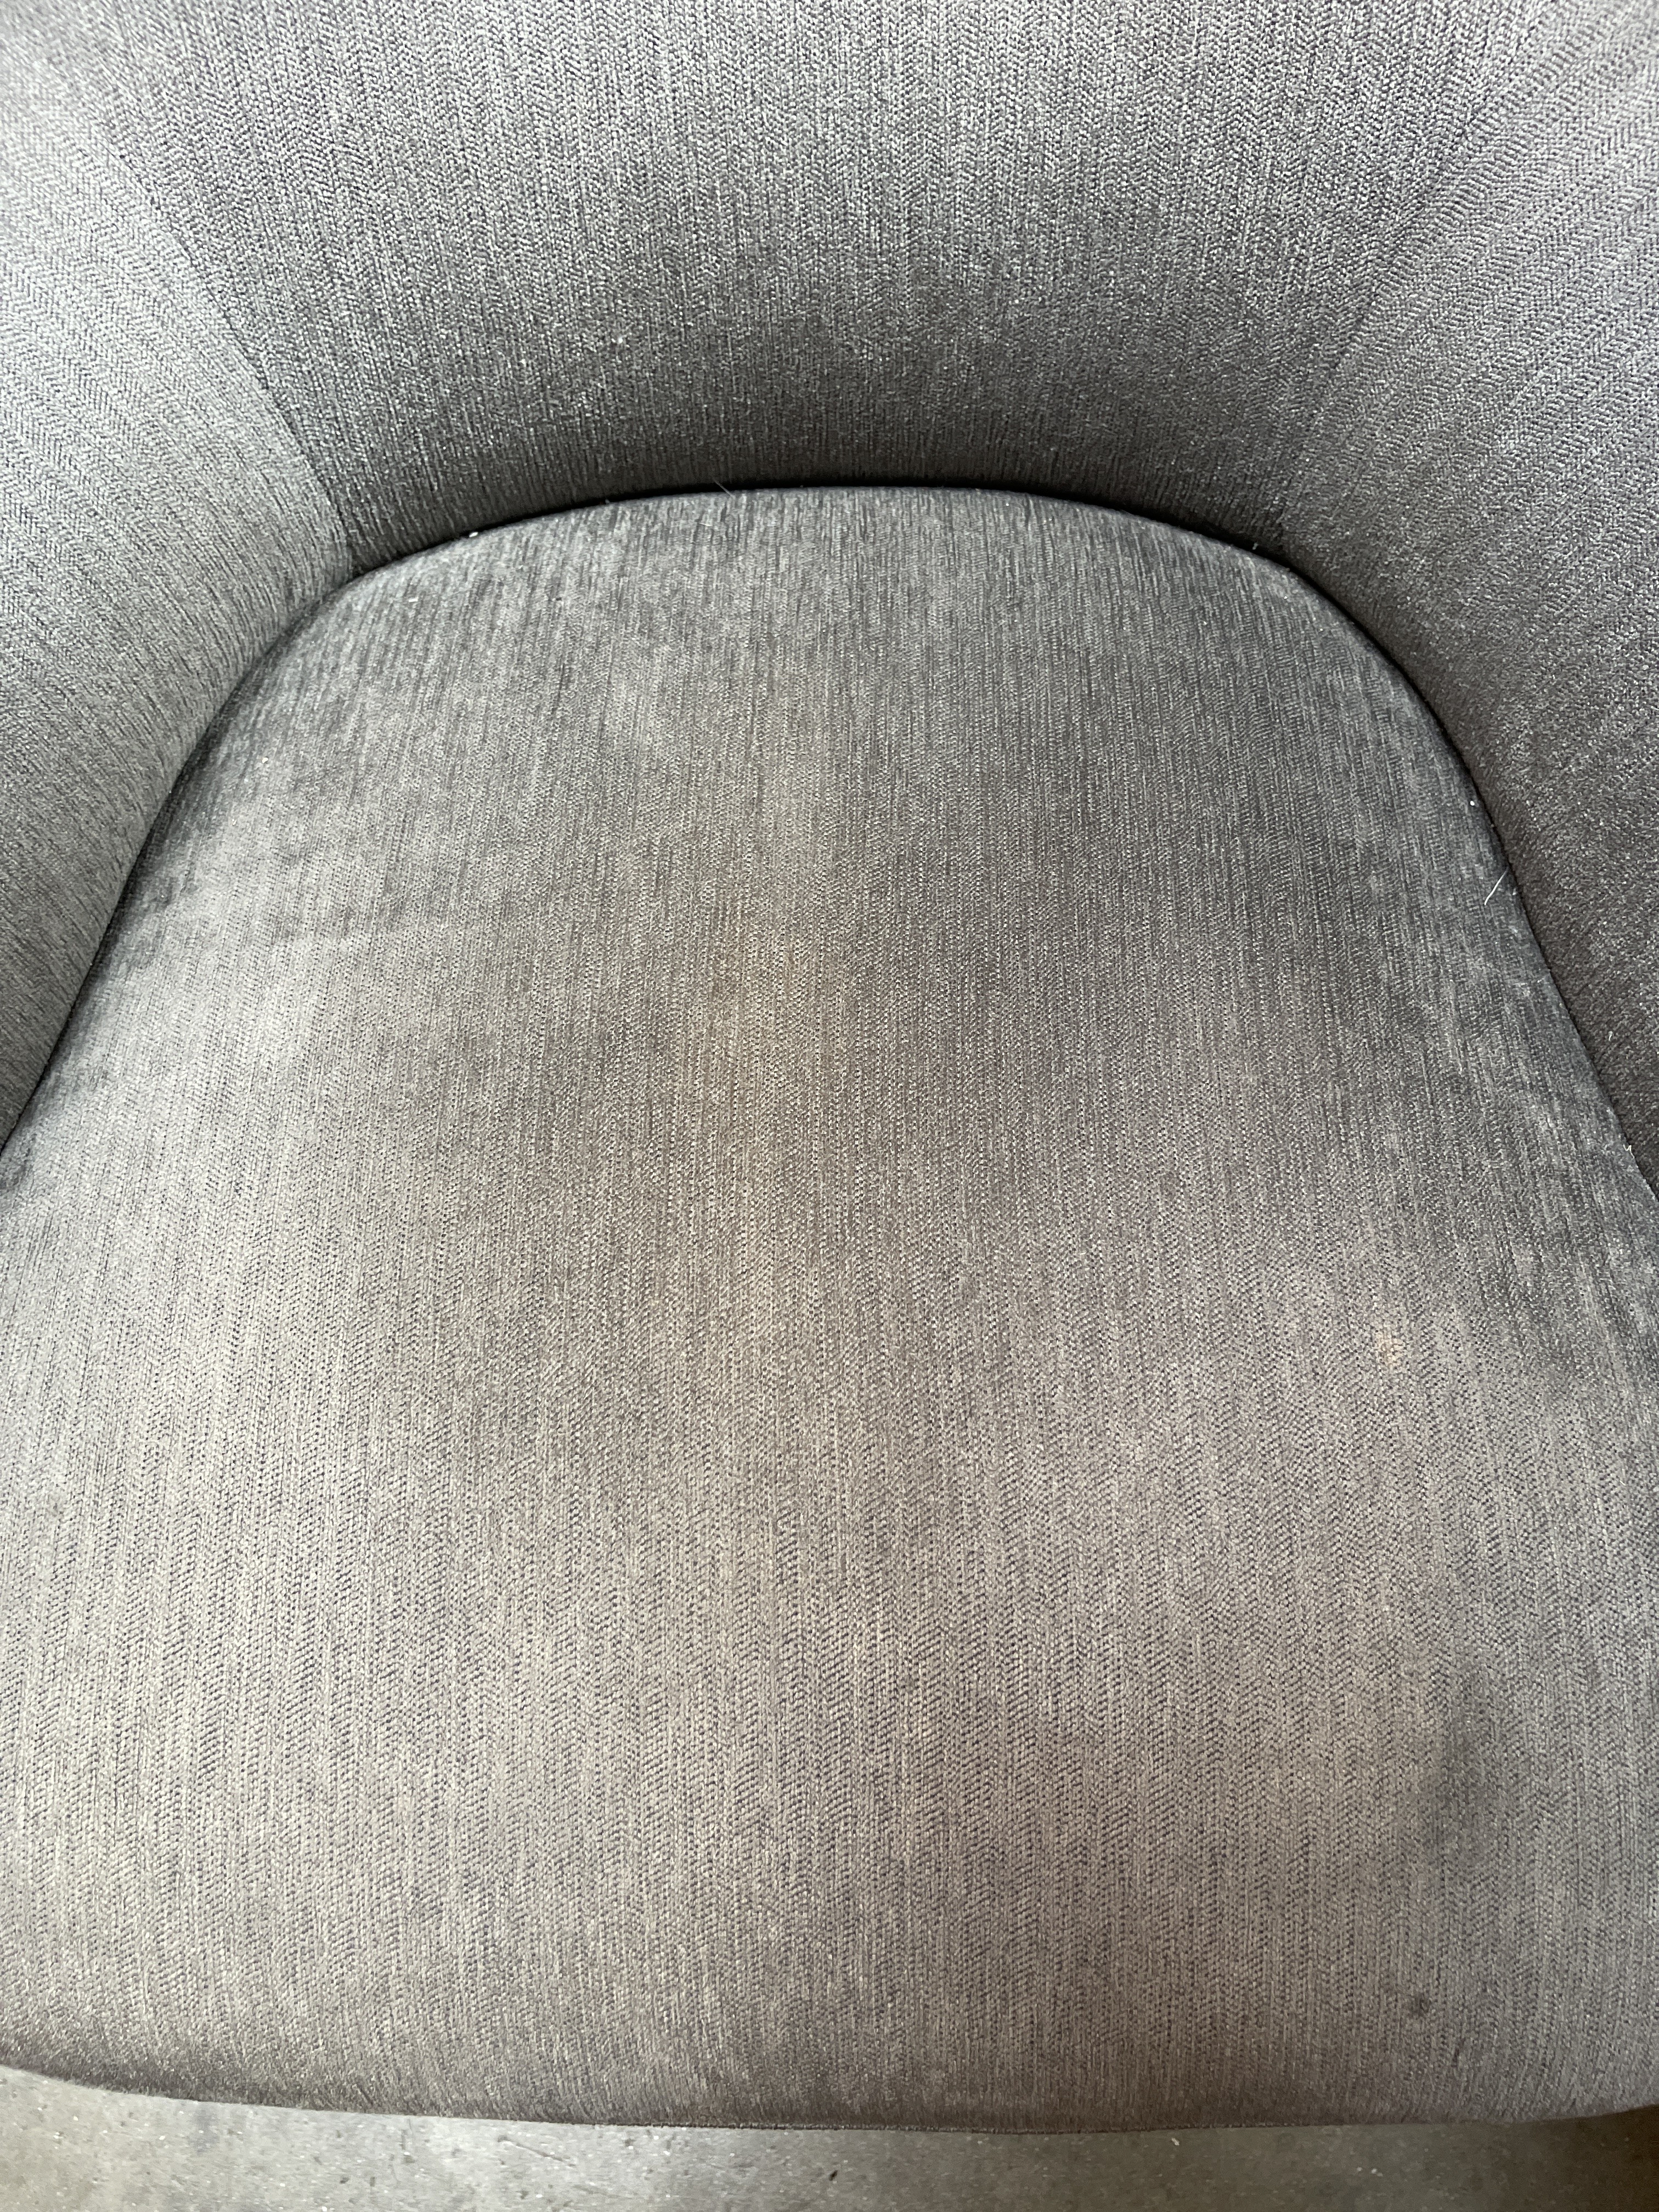 a close up of a chair with a black and white background